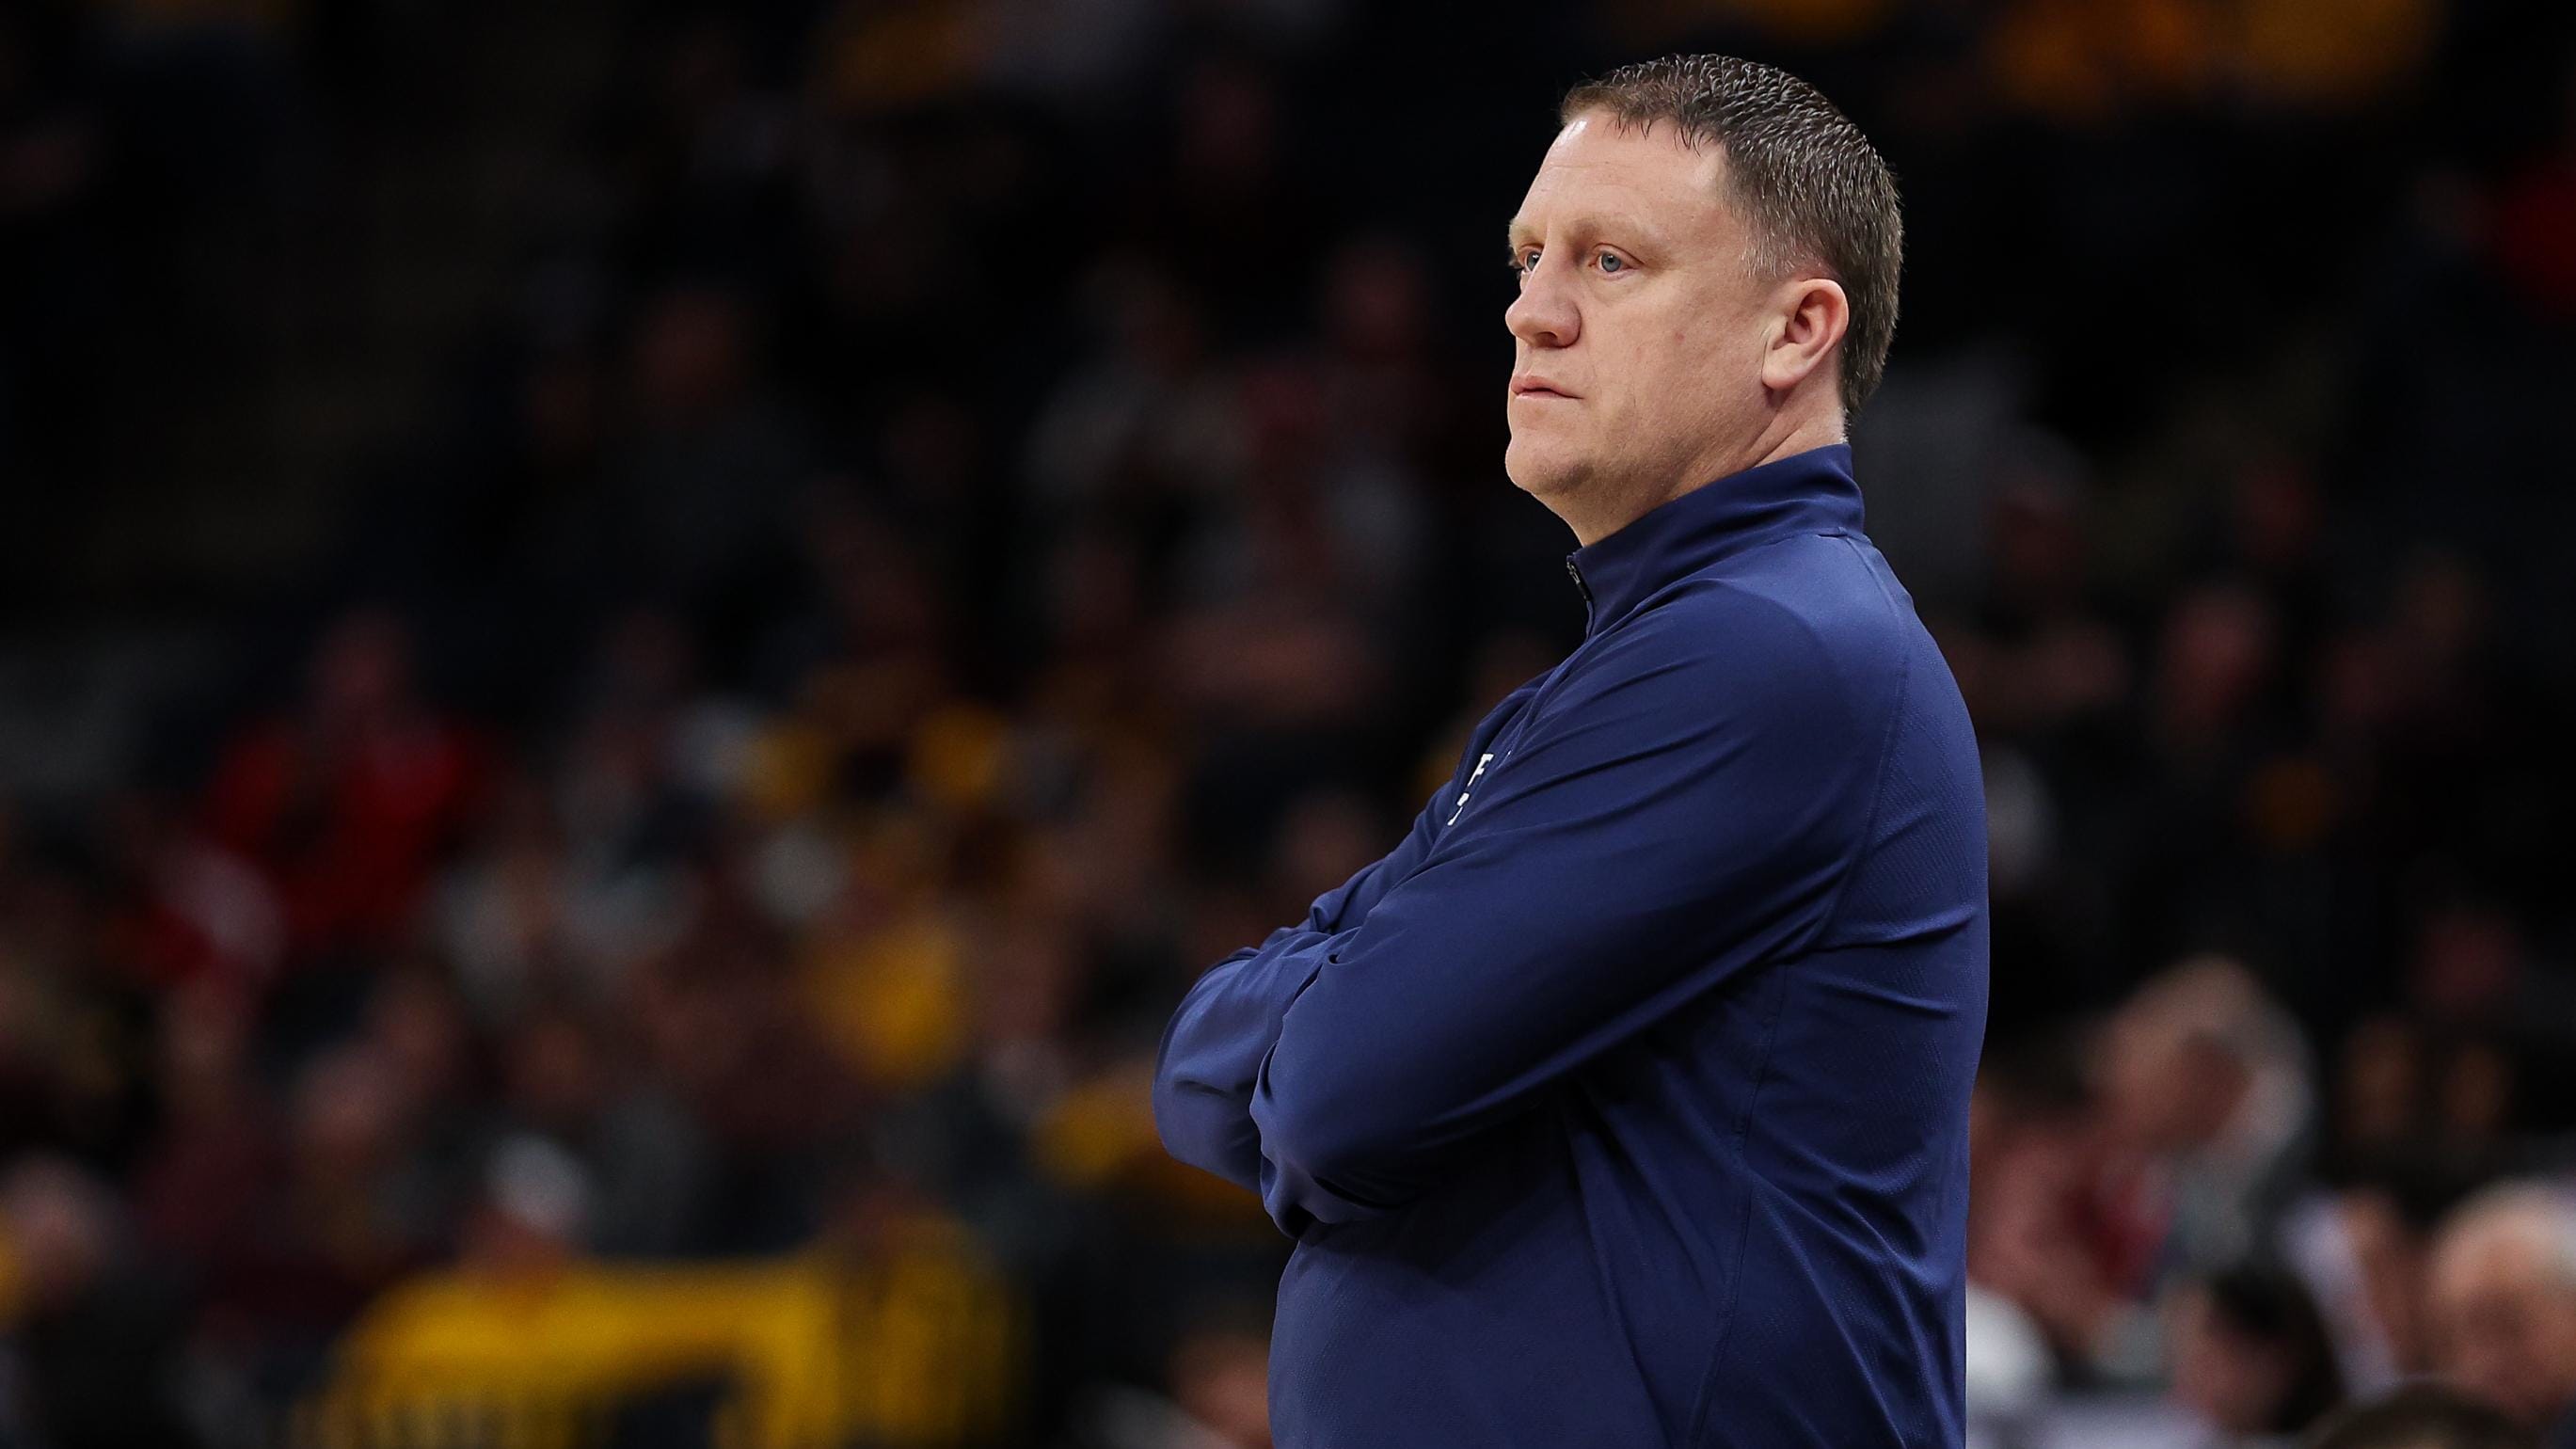 Penn State men's basketball coach Mike Rhoades completed his first season with the Nittany Lions with a 16-17 record.